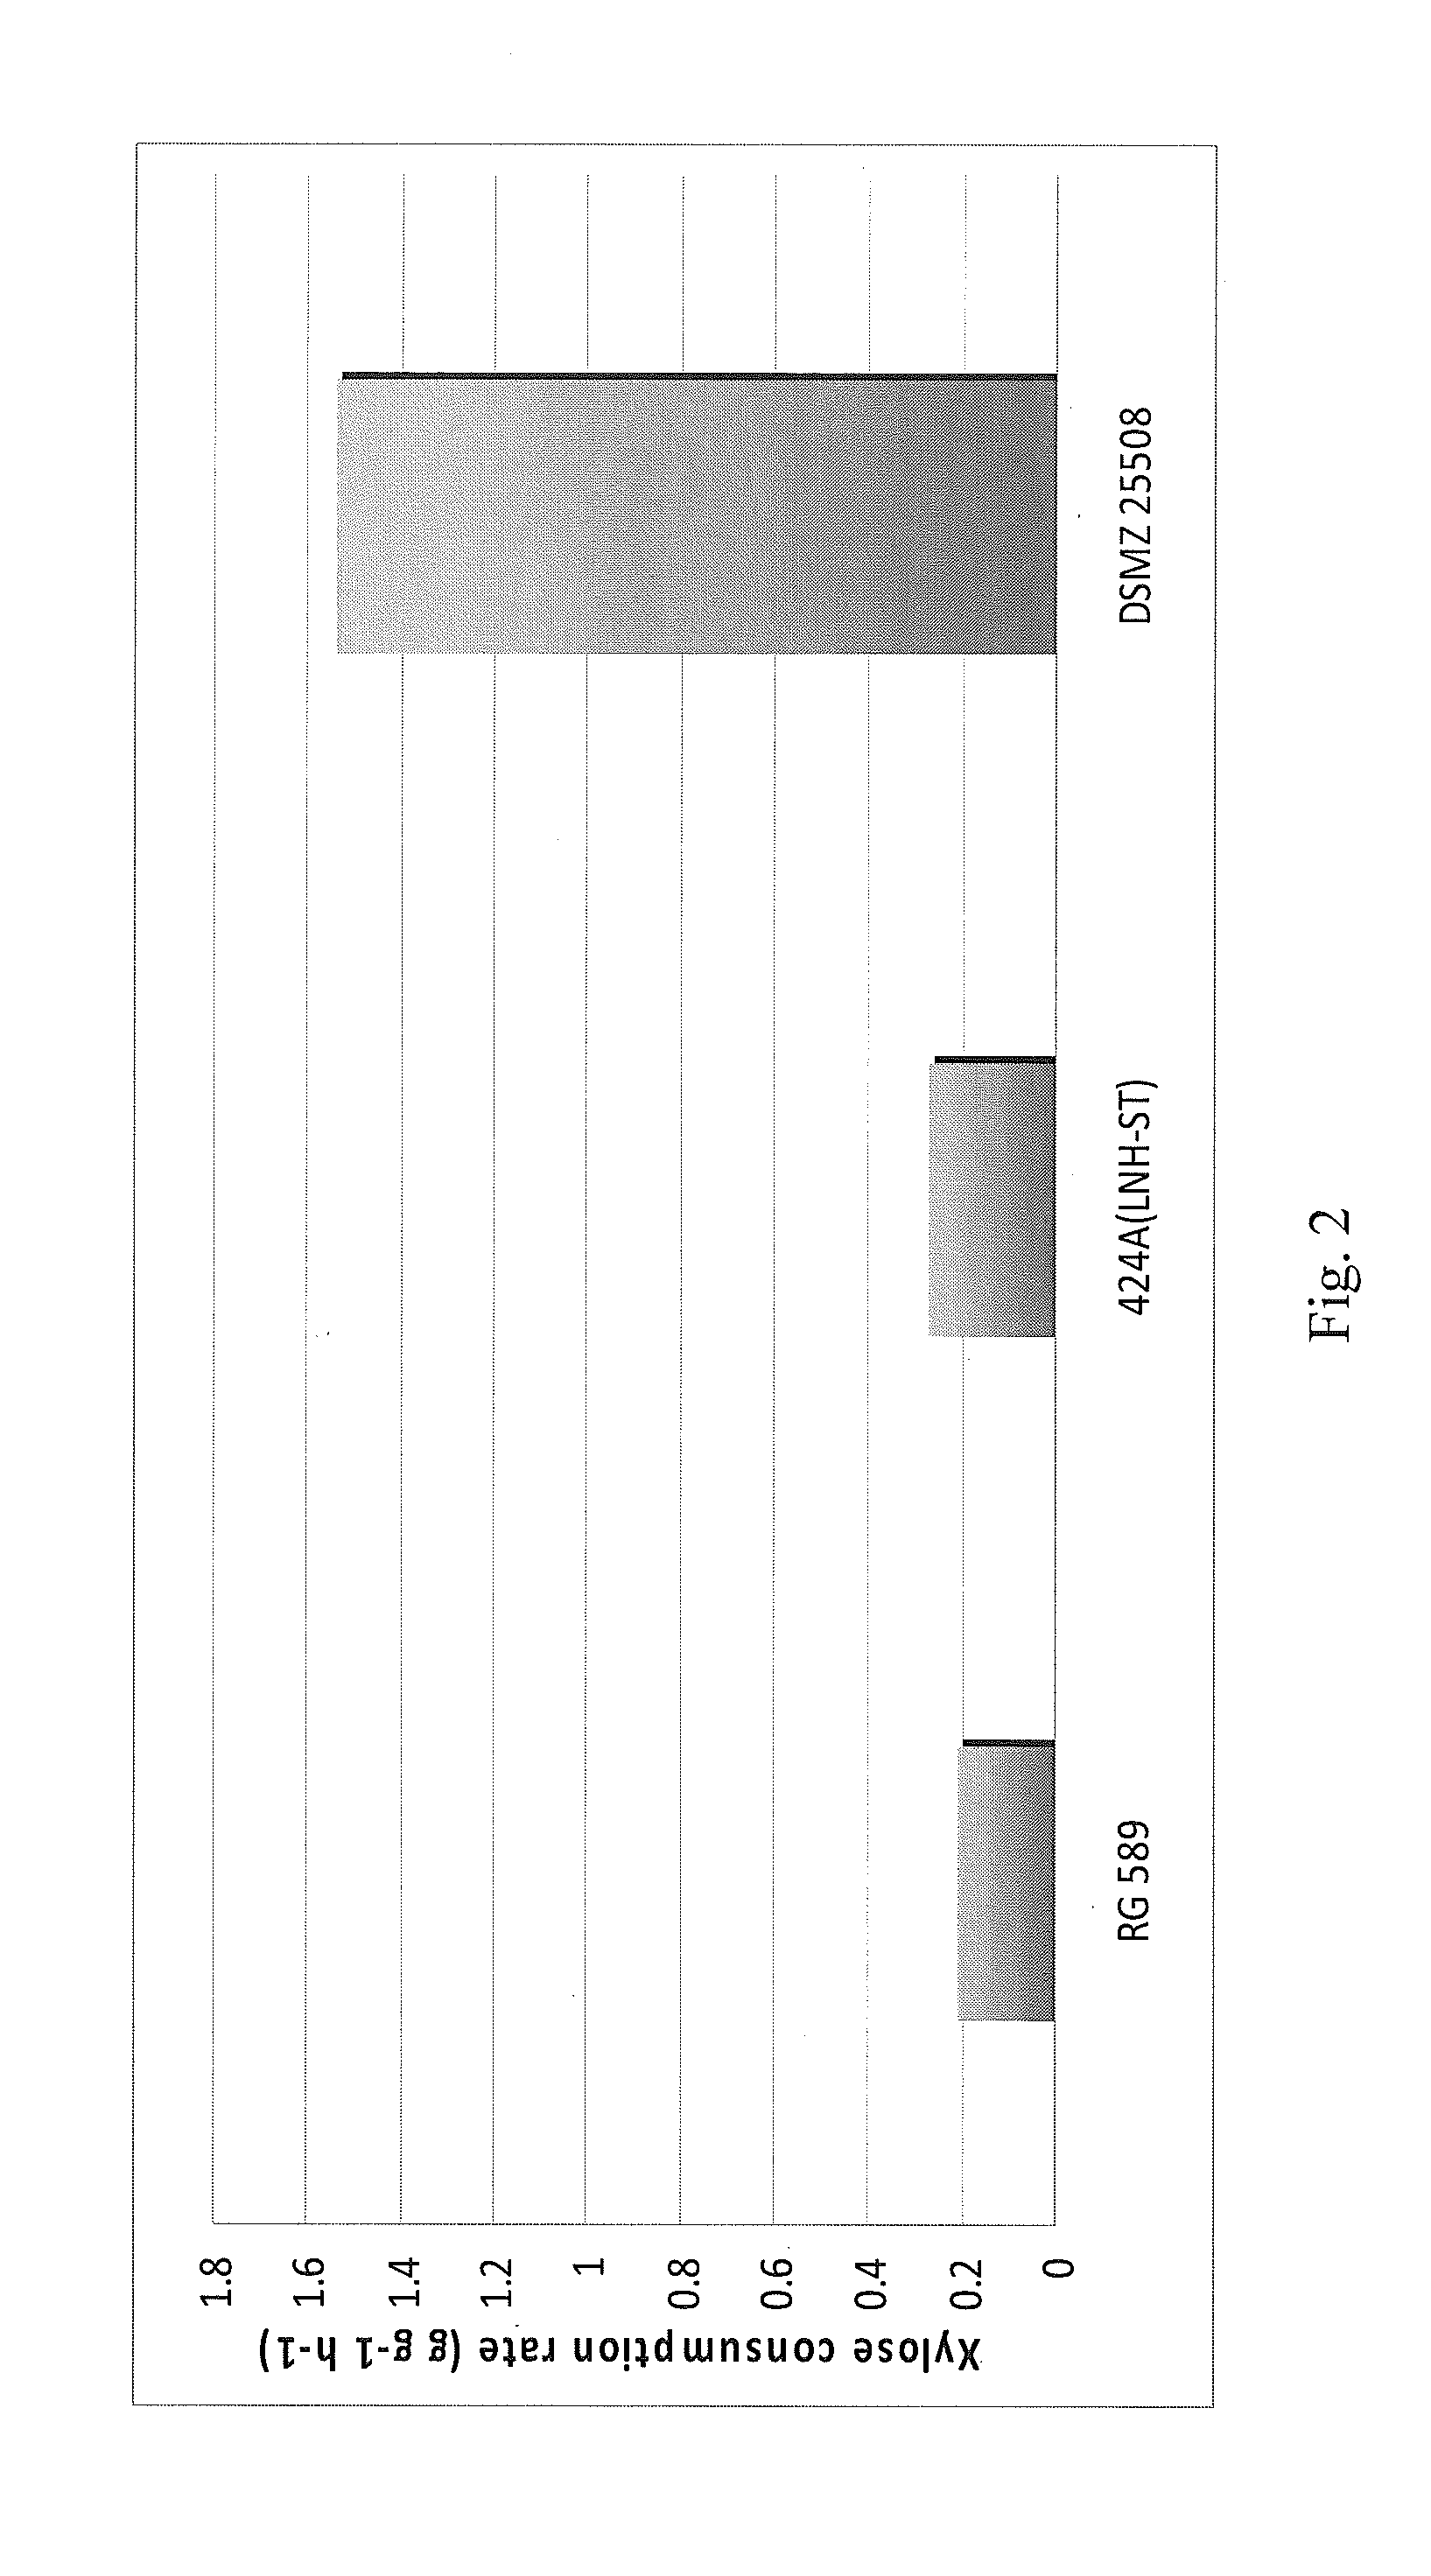 Isolated yeast strain having high xylose consumption rate and process for production of ethanol using the strain